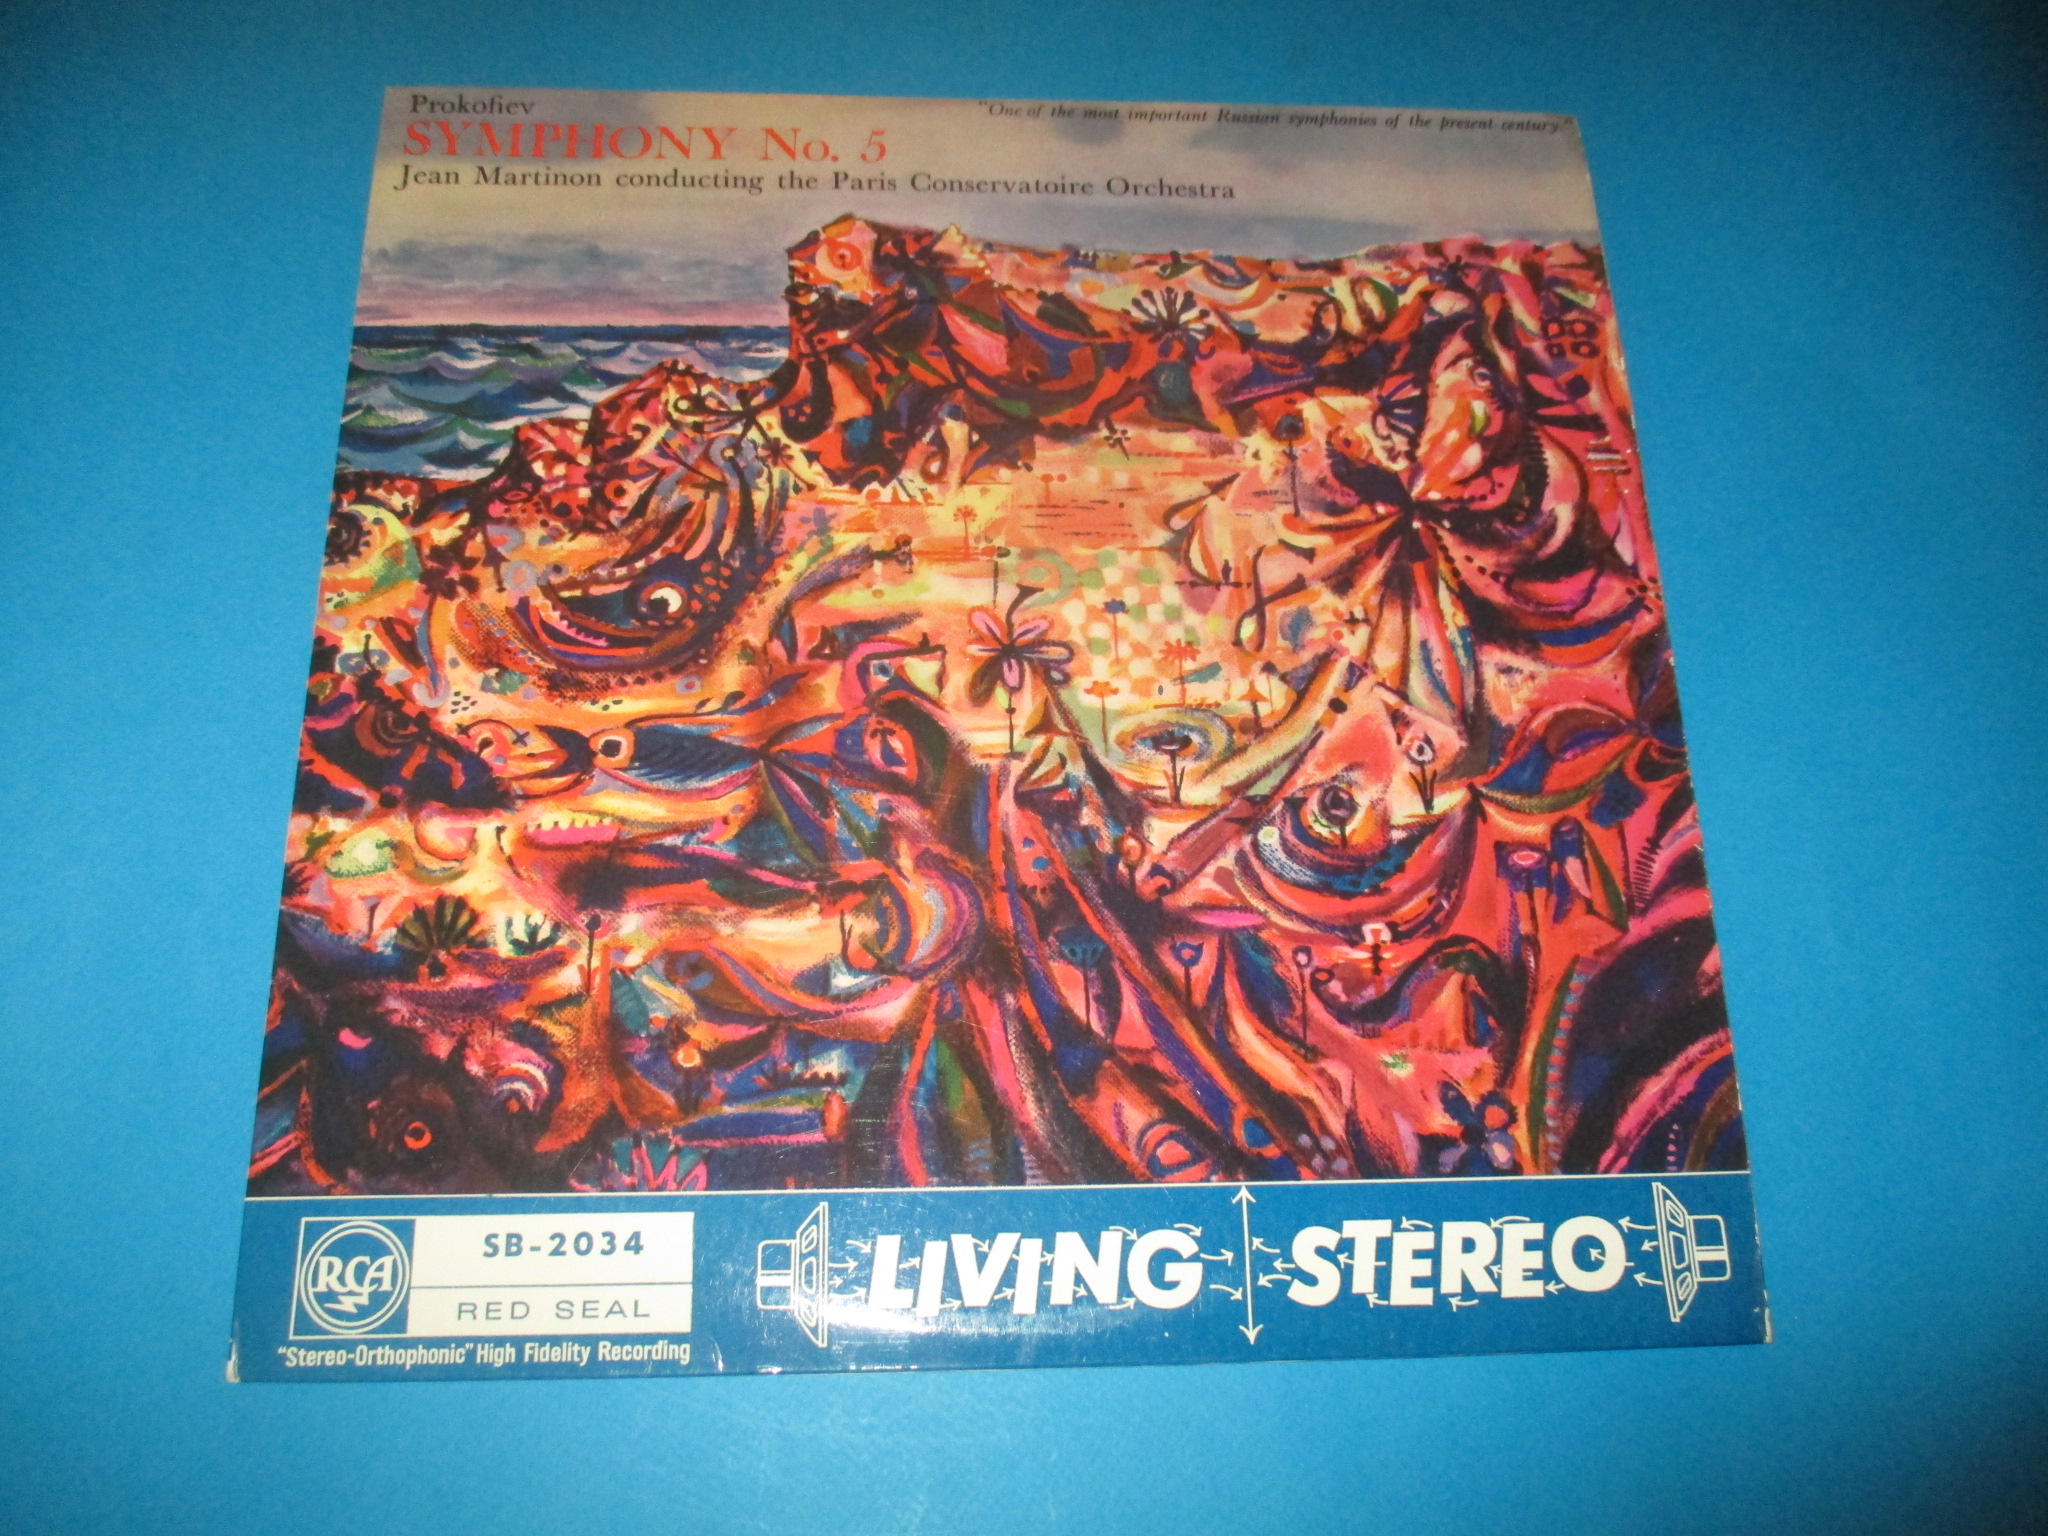 Disque Symphony N° 5, Prokofiev, Jean Martinon conducting the Paris Conservatoire Orchestra, 33 tours Living Stereo RCA